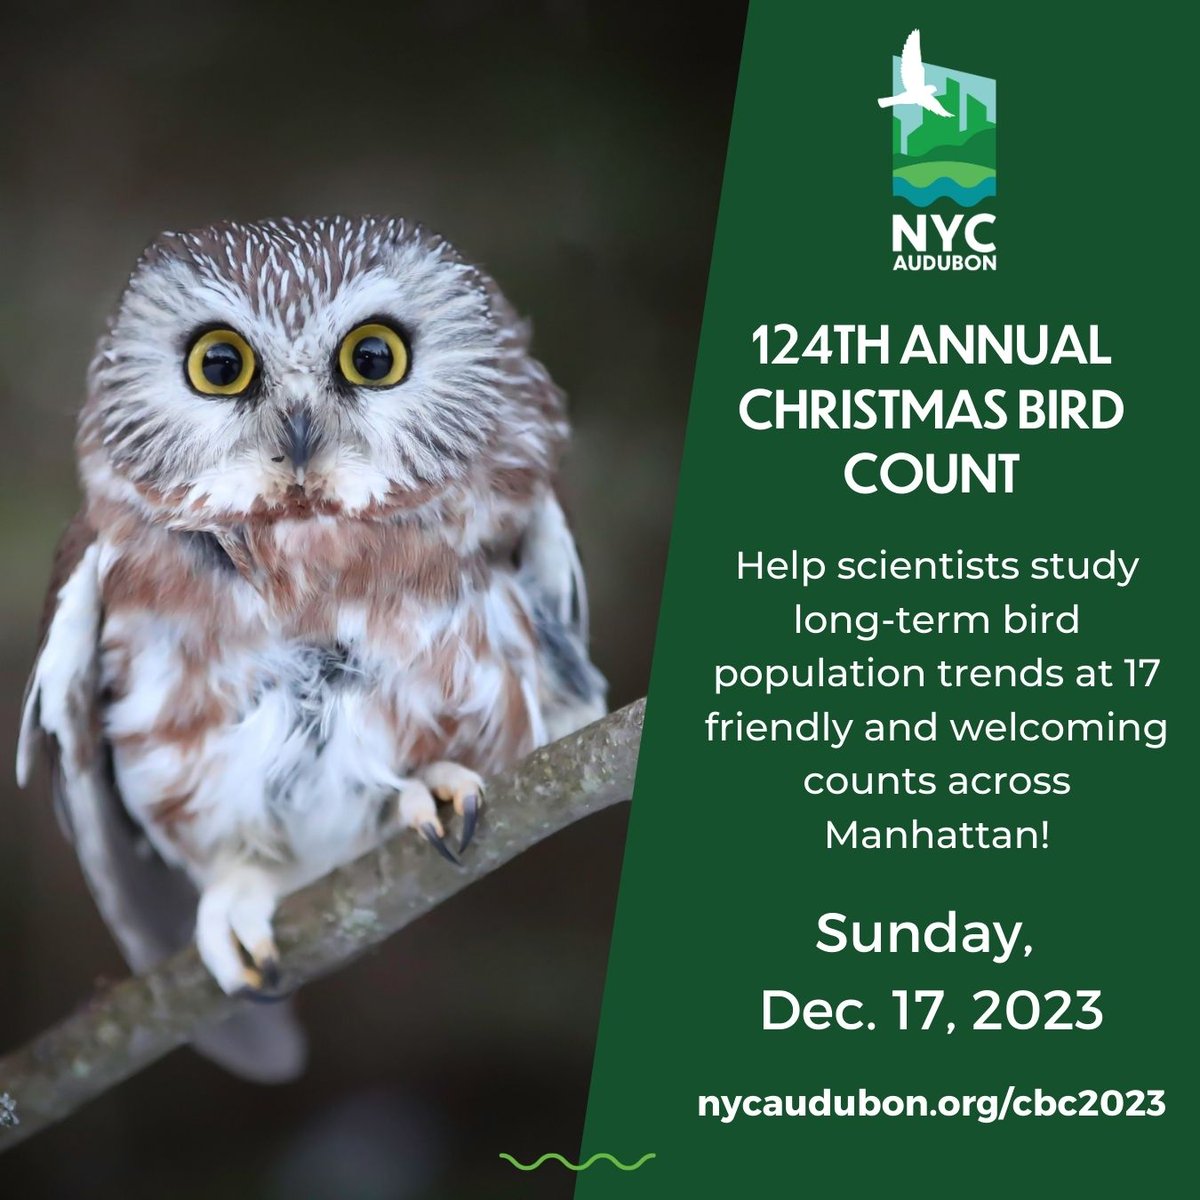 Last chance! Join the #AudubonCBC in Manhattan on Dec. 17. Help us find all the birds using our green spaces at over 17 fun counts across Manhattan 👀🦉 Welcoming to new and beginning birders, and a great time for the whole family! Learn more & register:  nycaudubon.org/christmas-bird…